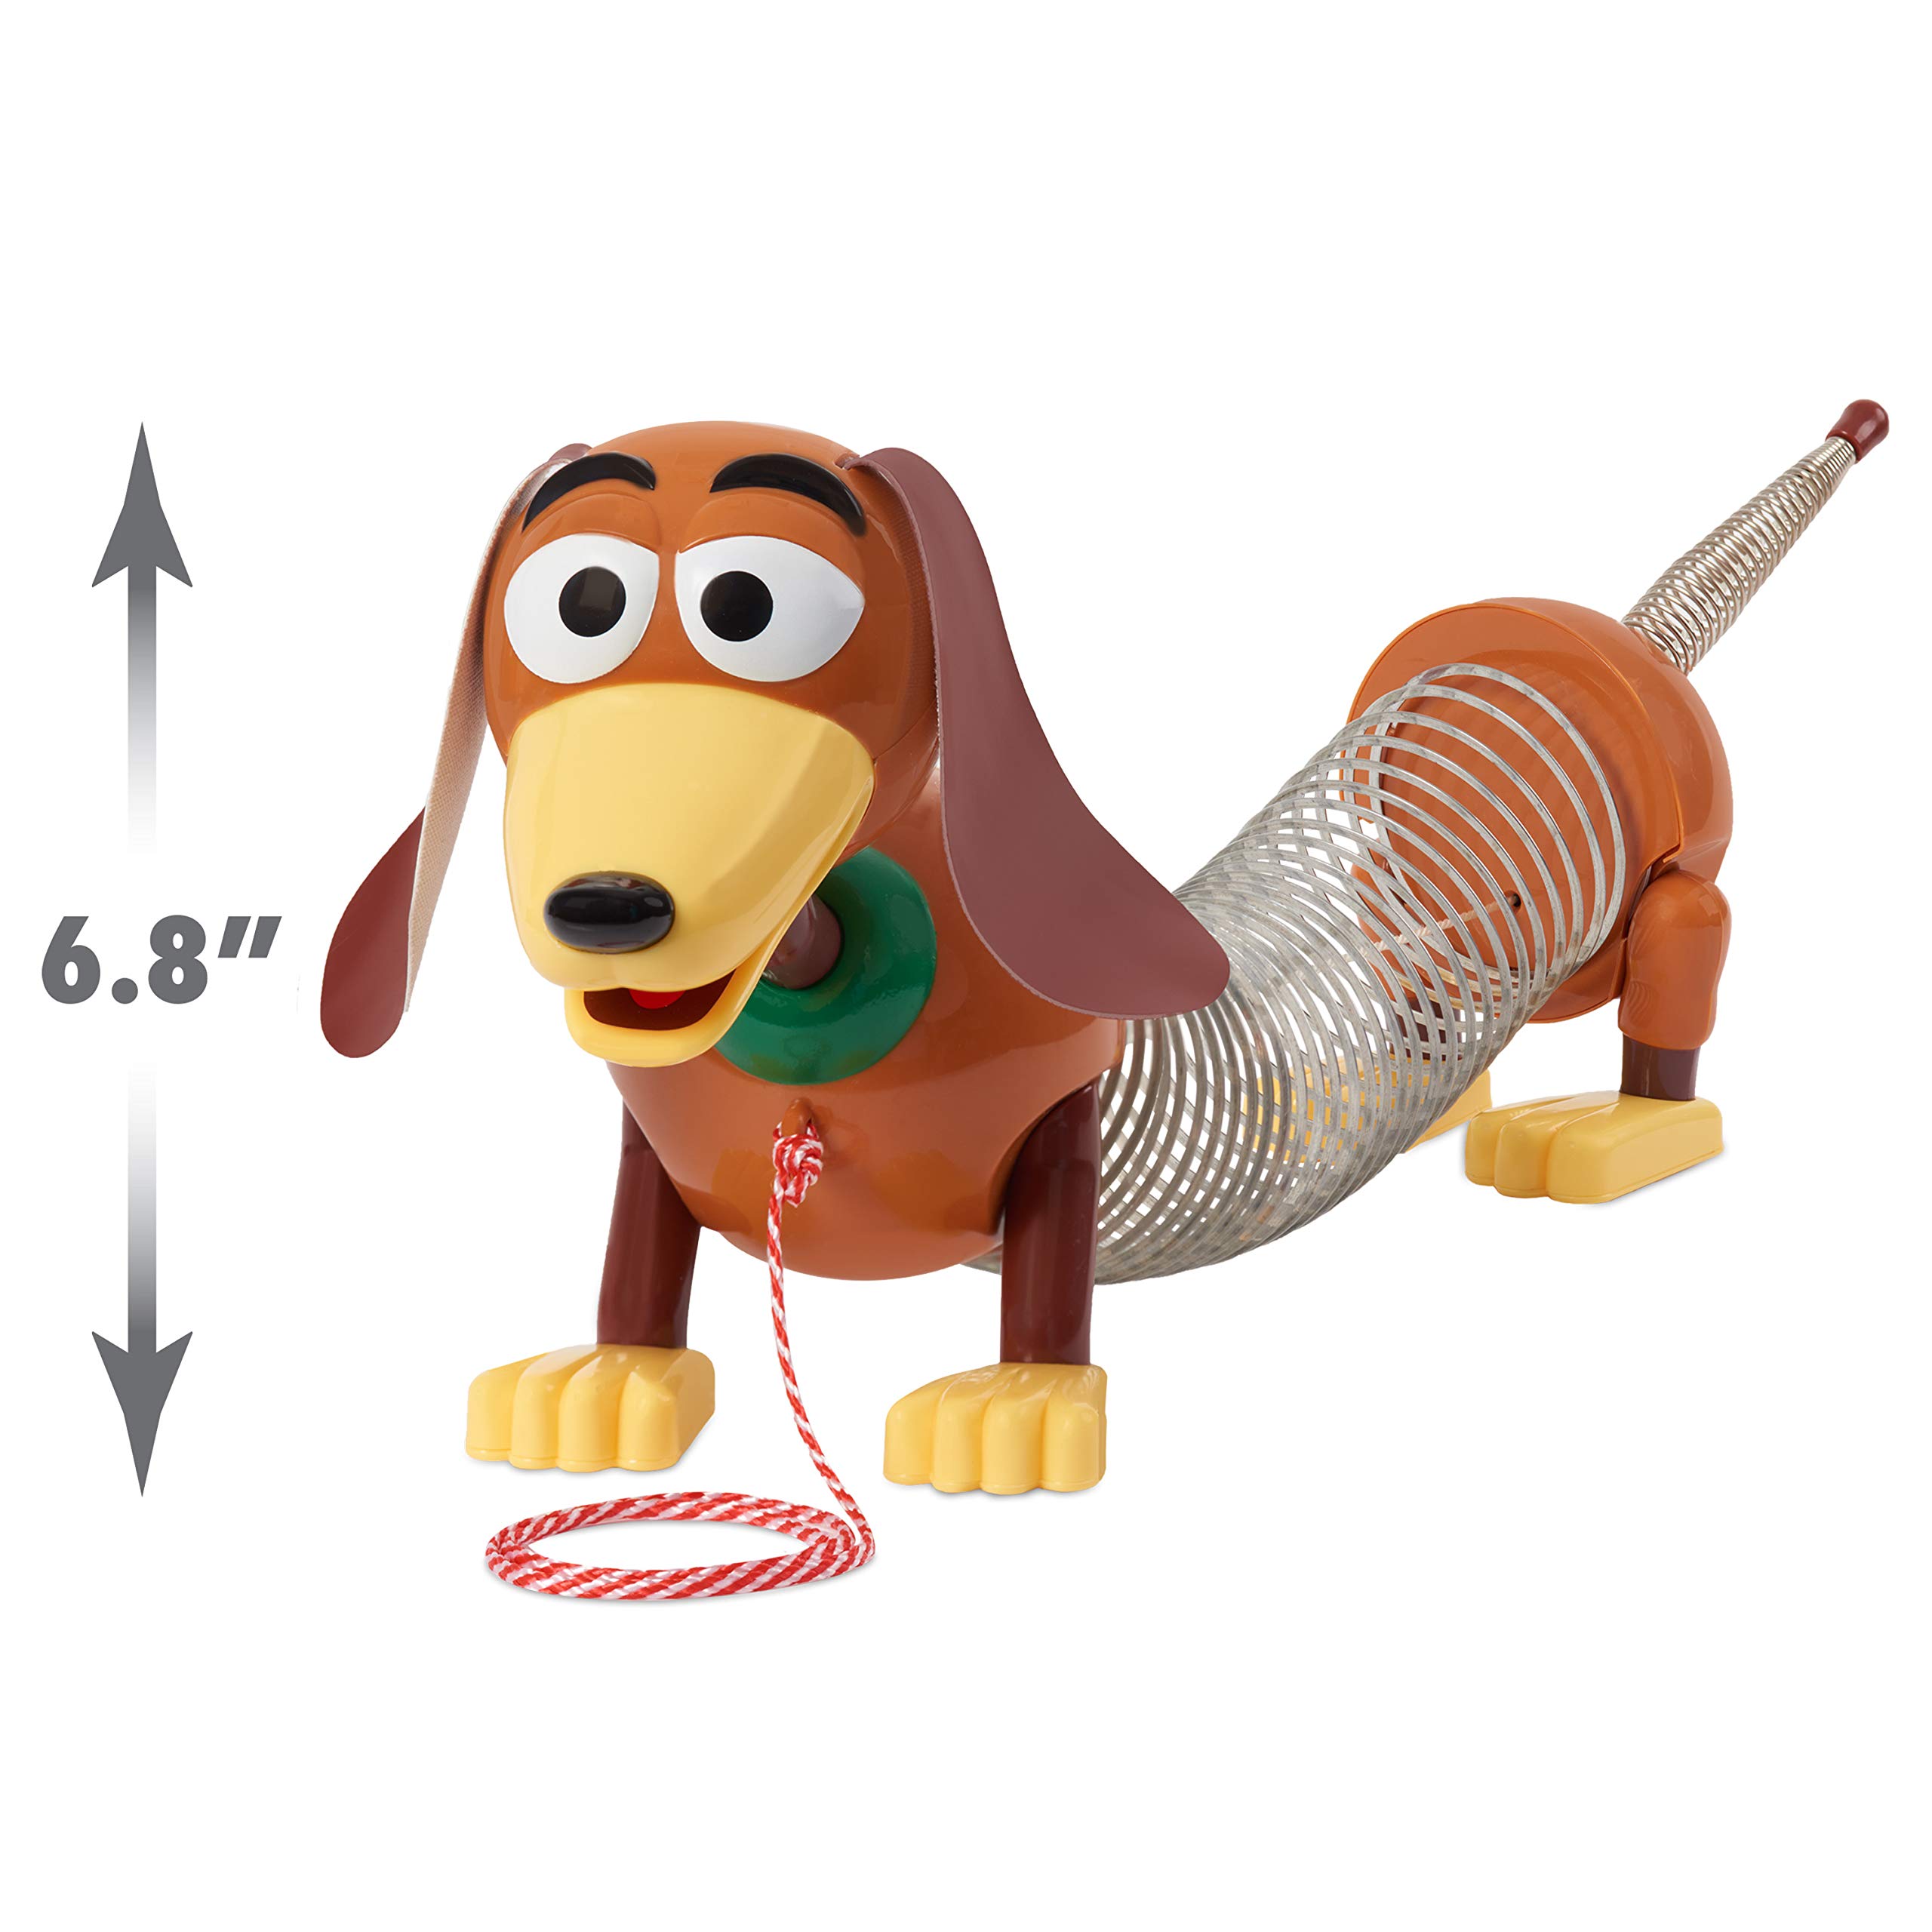 Disney•Pixar's Toy Story Slinky Dog Pull Toy, Walking Spring Toy for Boys and Girls, Officially Licensed Kids Toys for Ages 18 Month, Gifts and Presents by Just Play